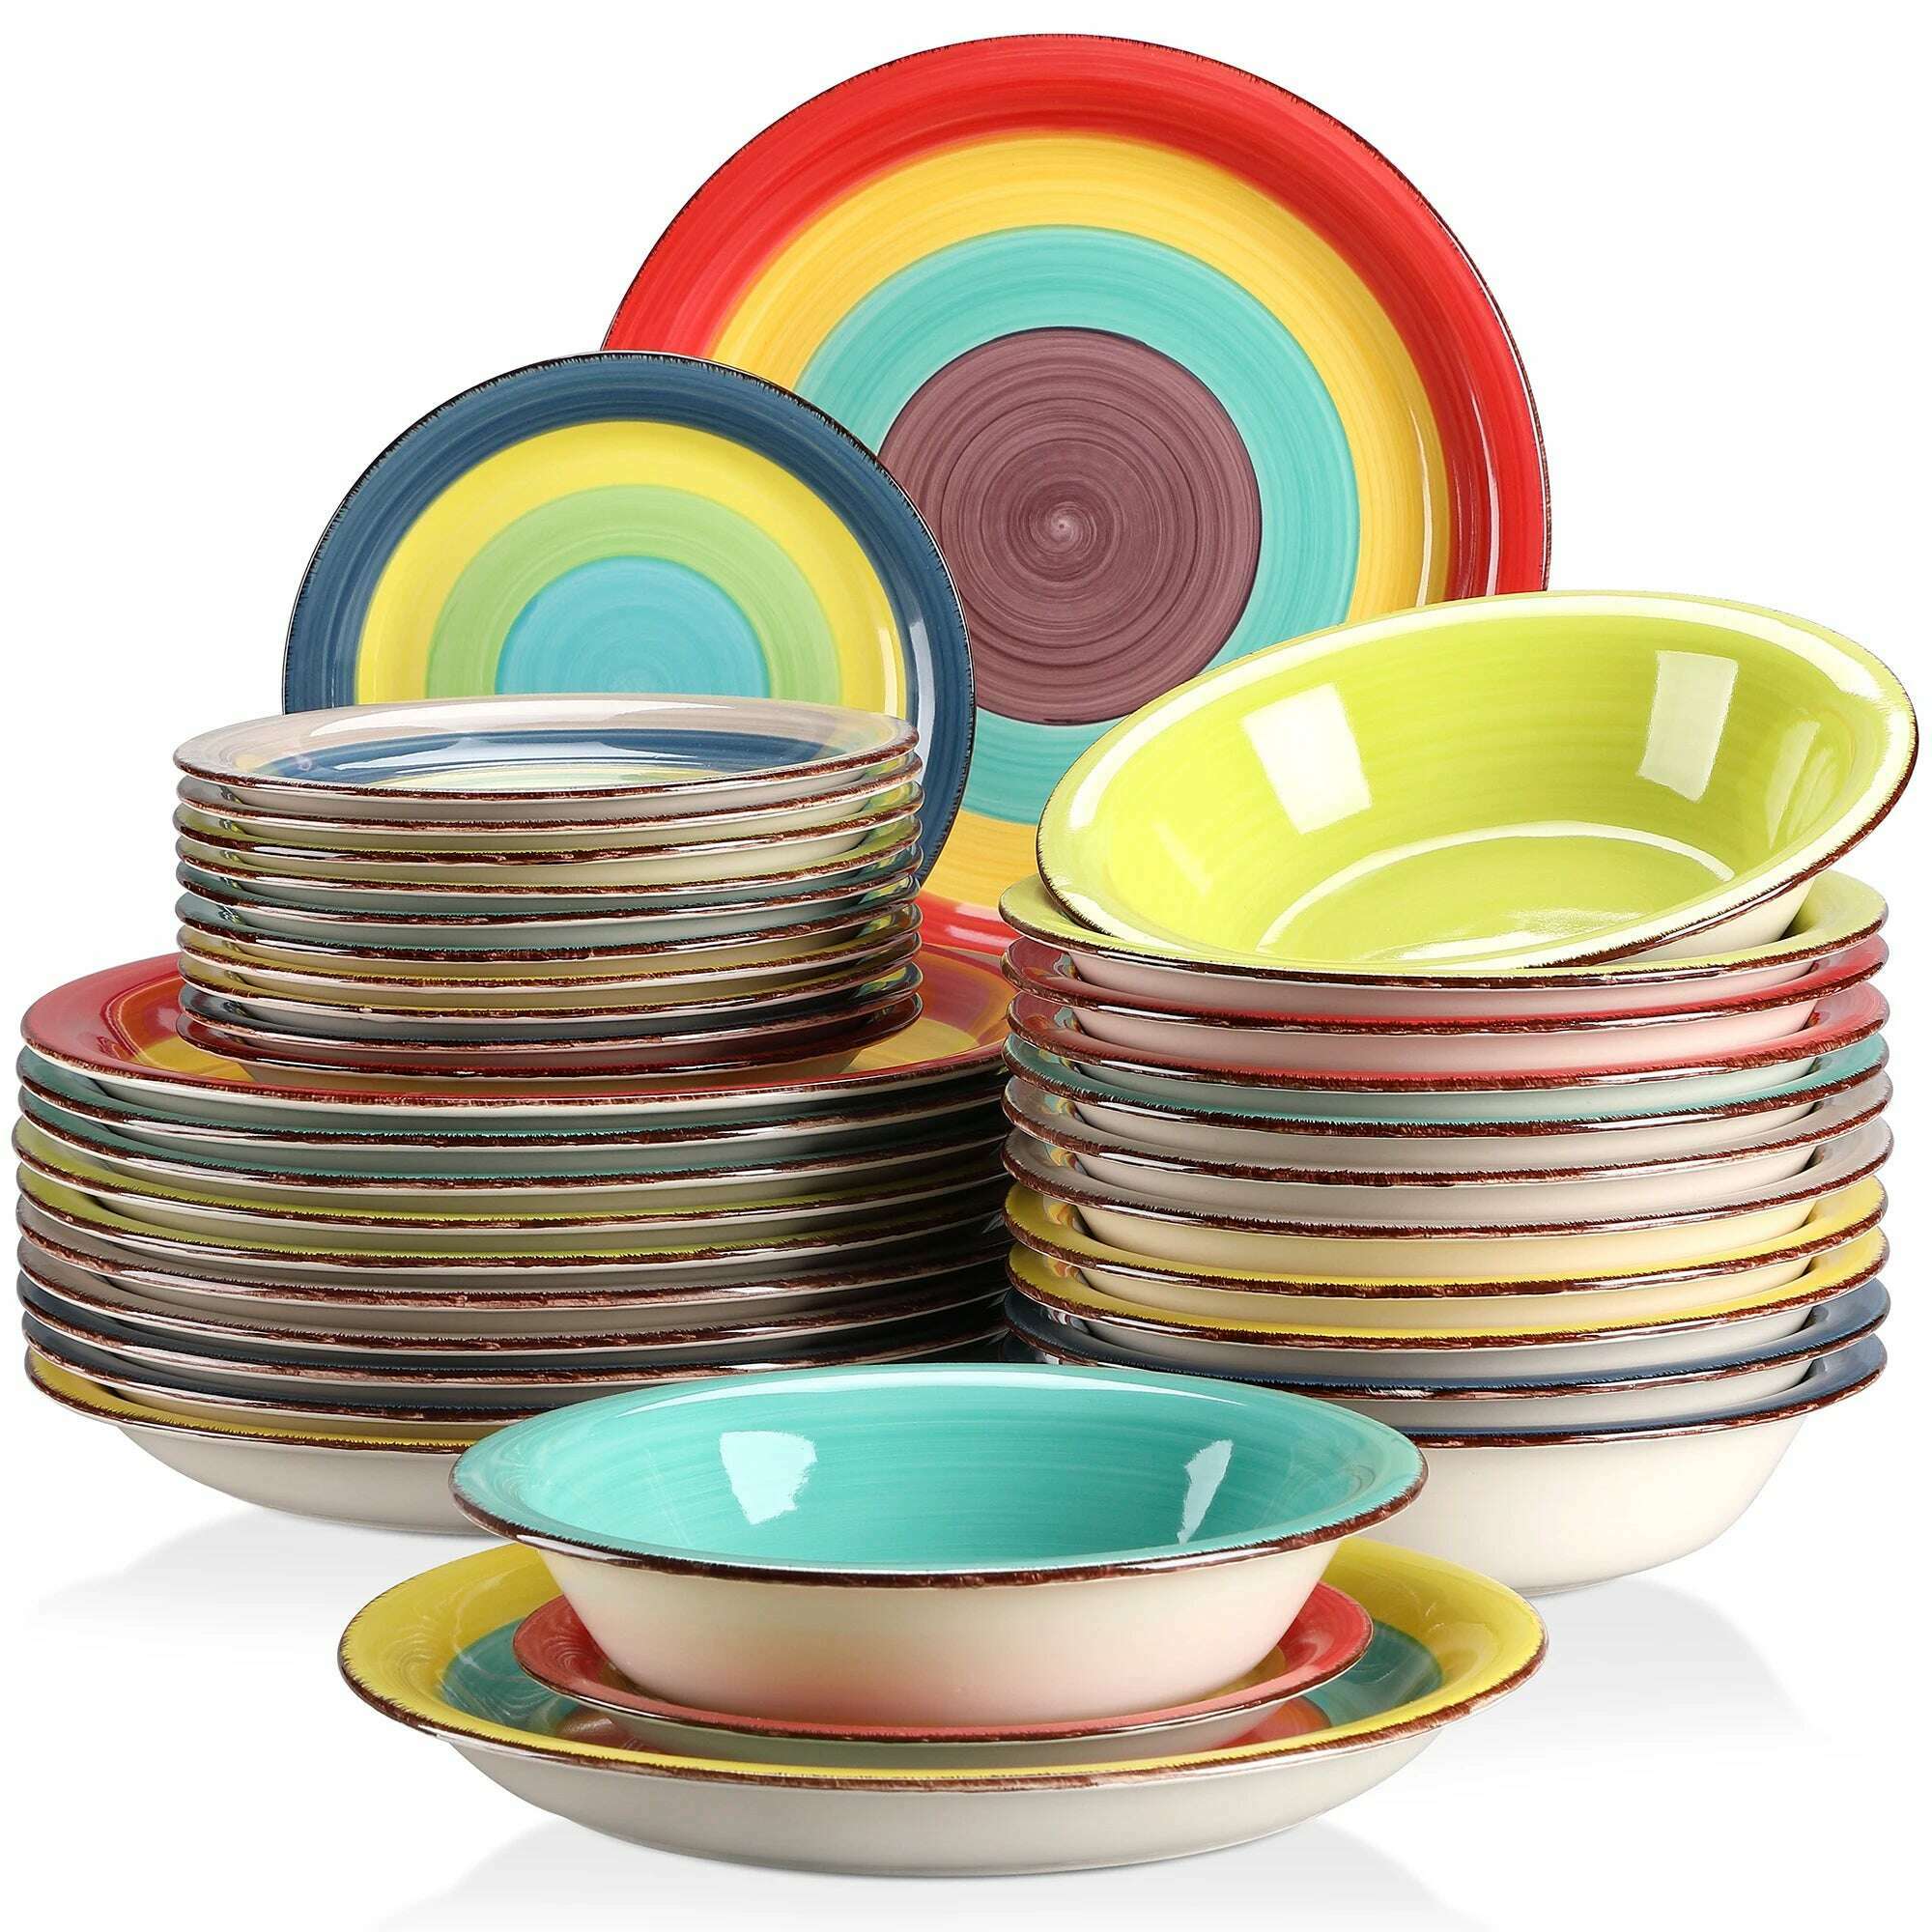 KIMLUD, New Vancasso Arco 18-Piece Ceramic Tableware Set Handpainted Spiral and Alternately Colourful Pattern Stoneware Dinner Set for 6, 36-Piece / United States, KIMLUD Womens Clothes